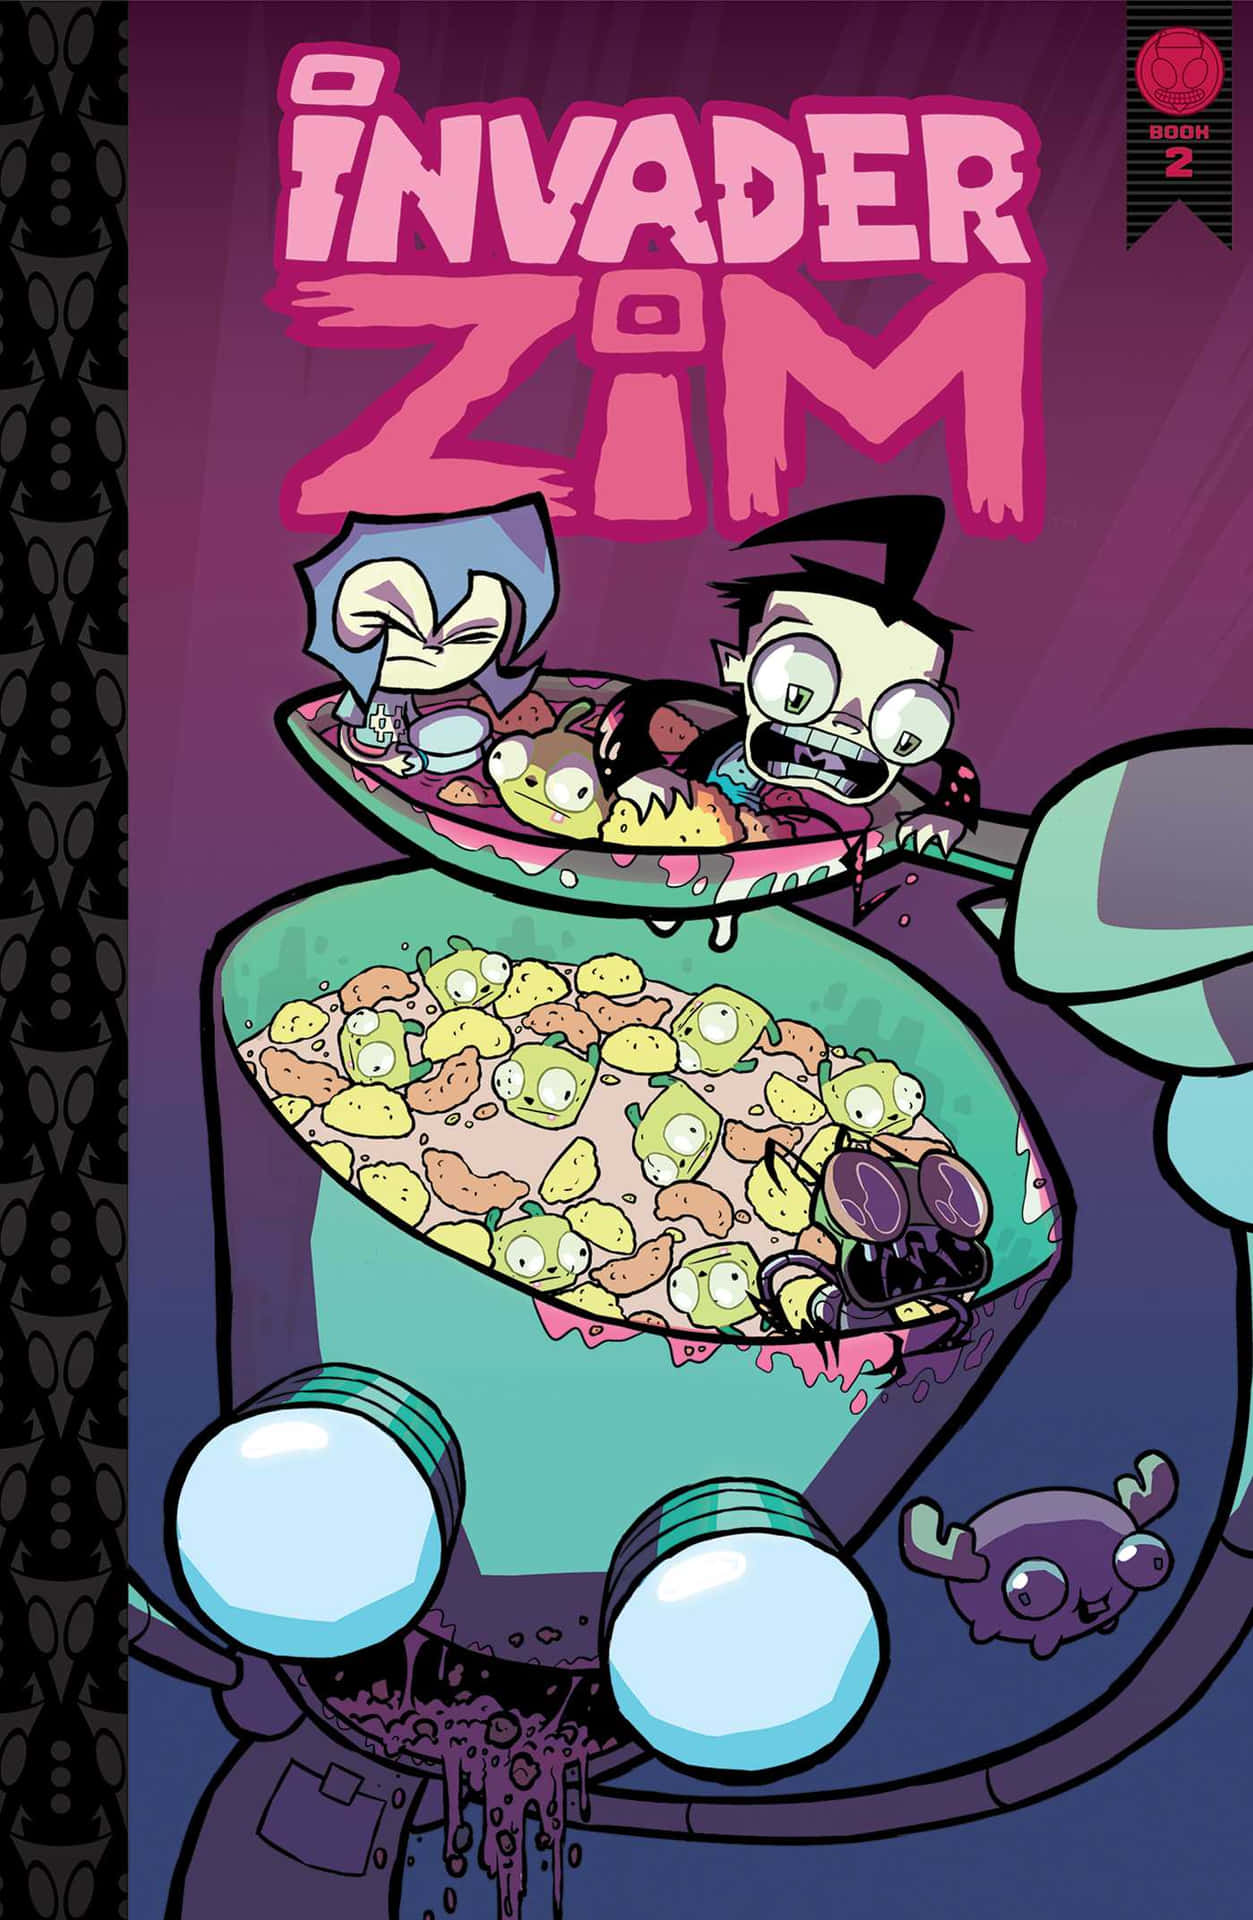 Invader Zim, an extraterrestrial invader from the planet Irk